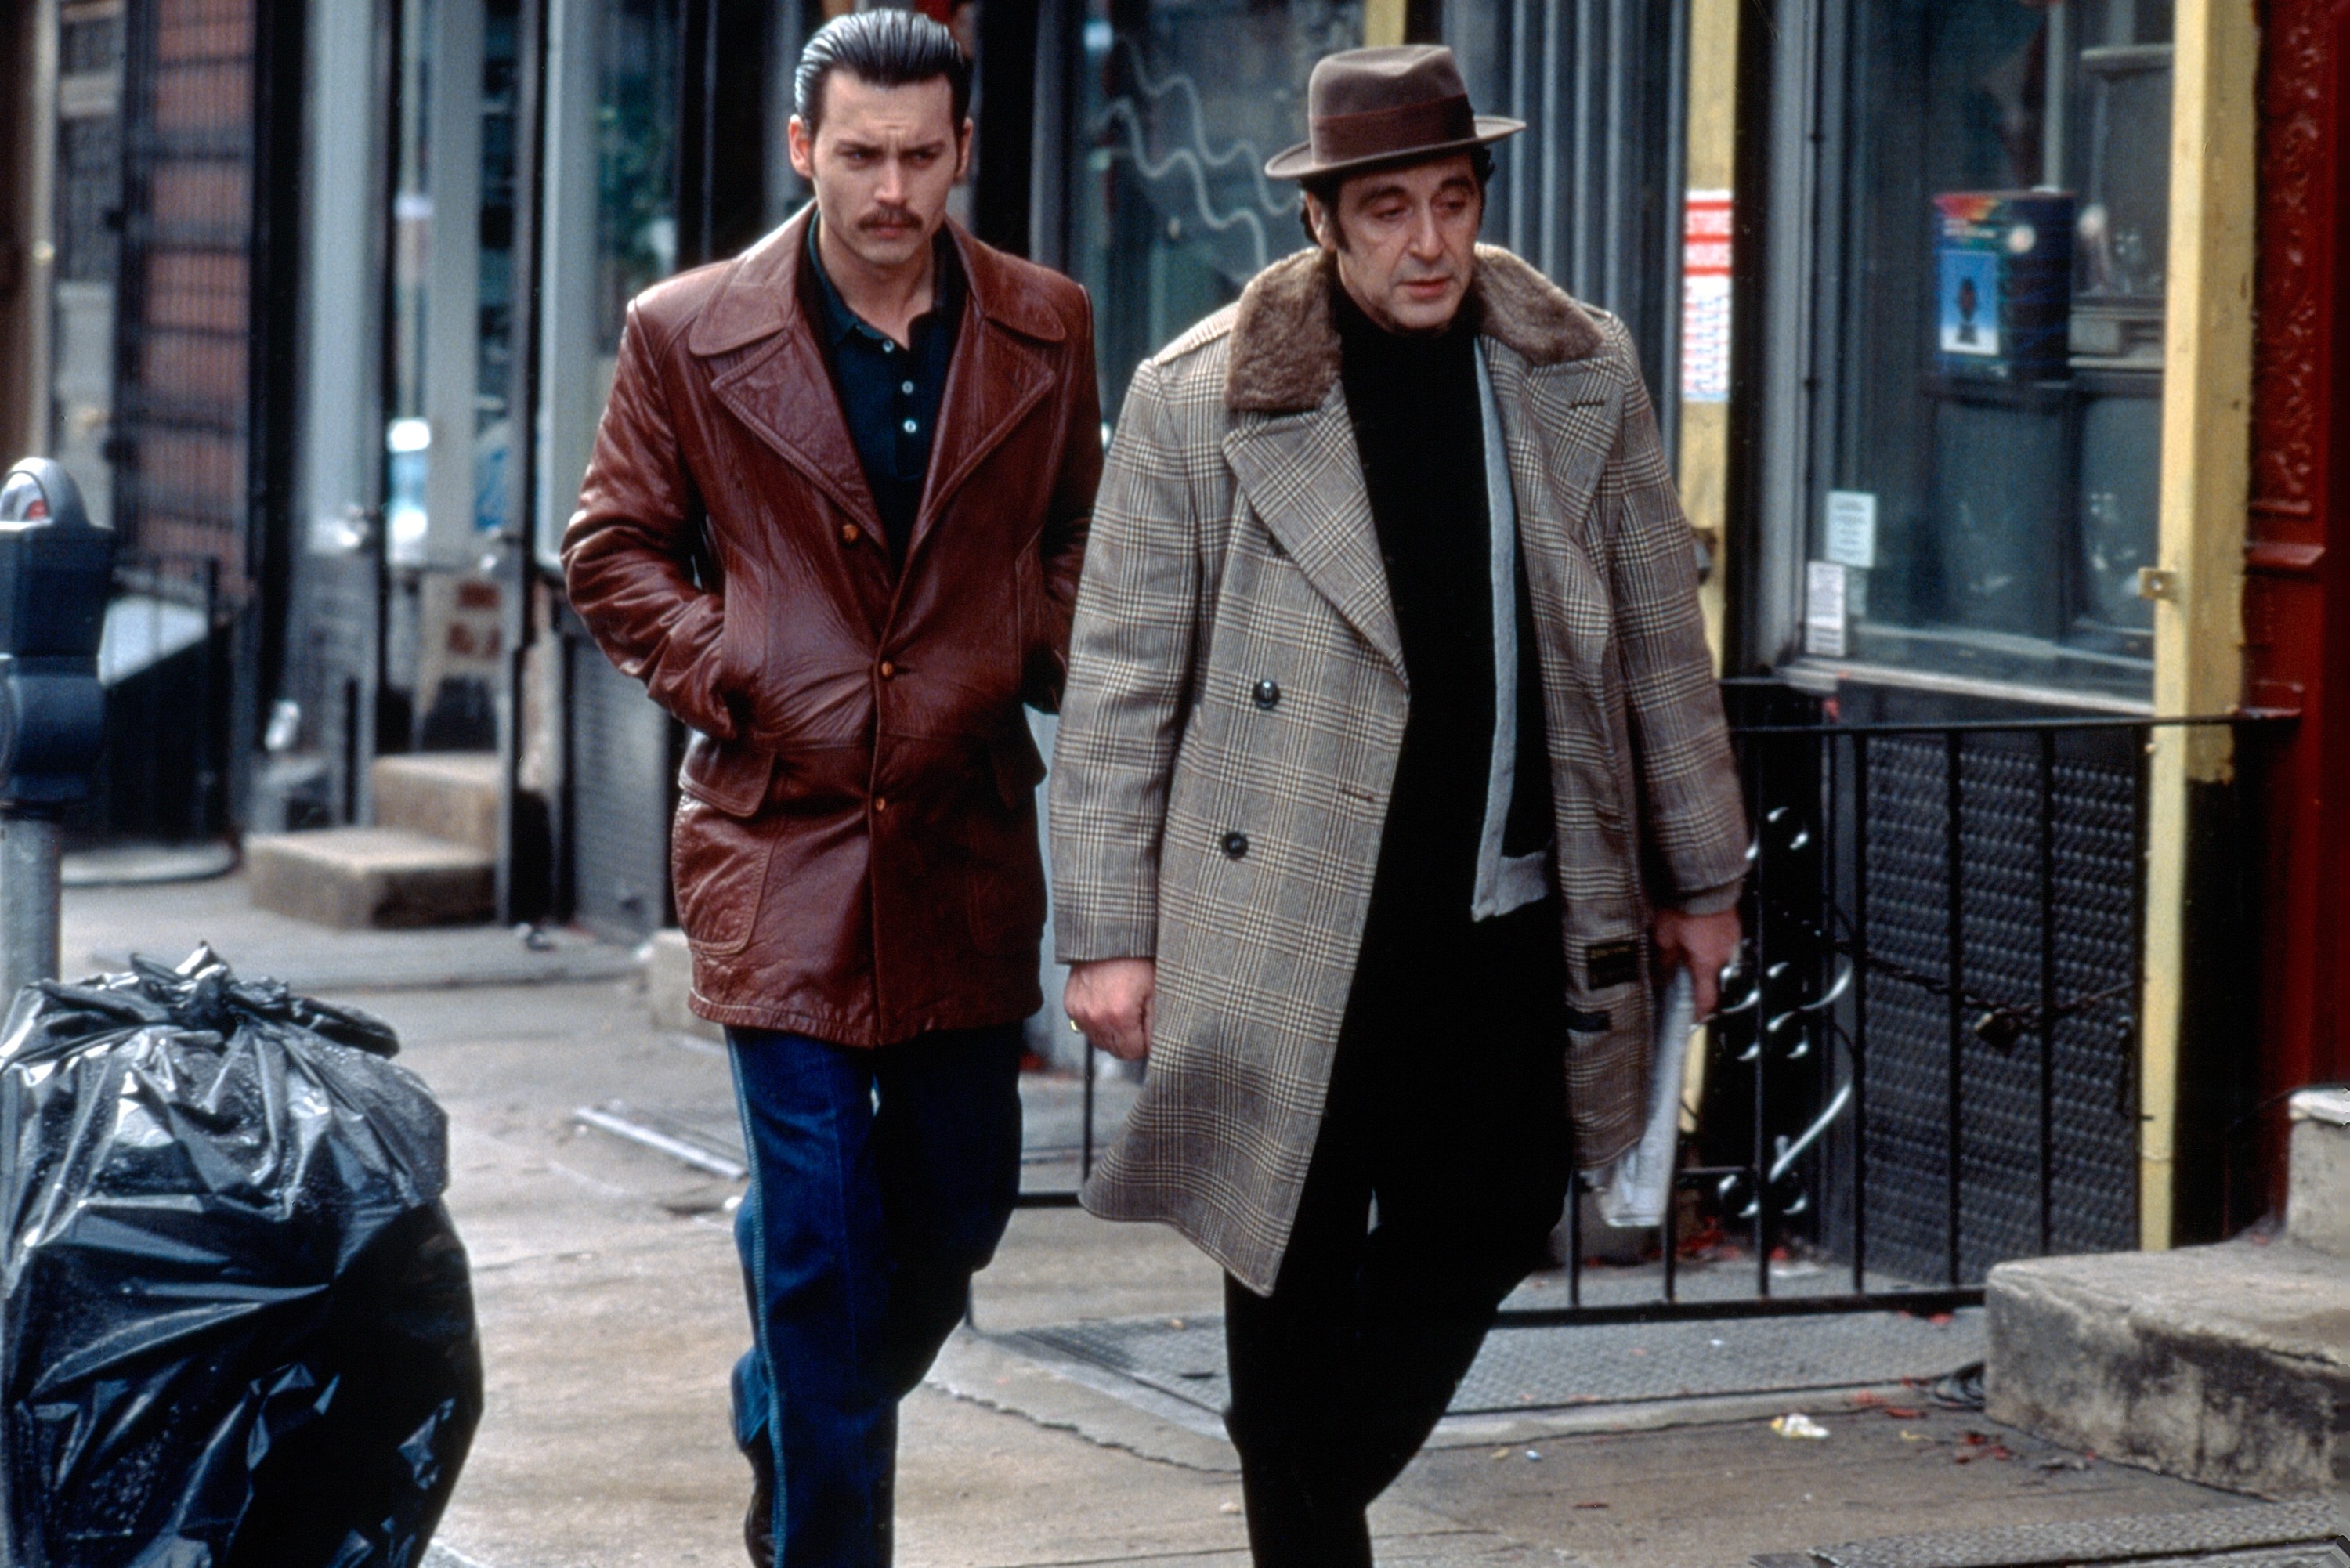 DONNIE BRASCO, from left: Johnny Depp, Al Pacino, 1997. © Sony Pictures/Courtesy Everett Collection